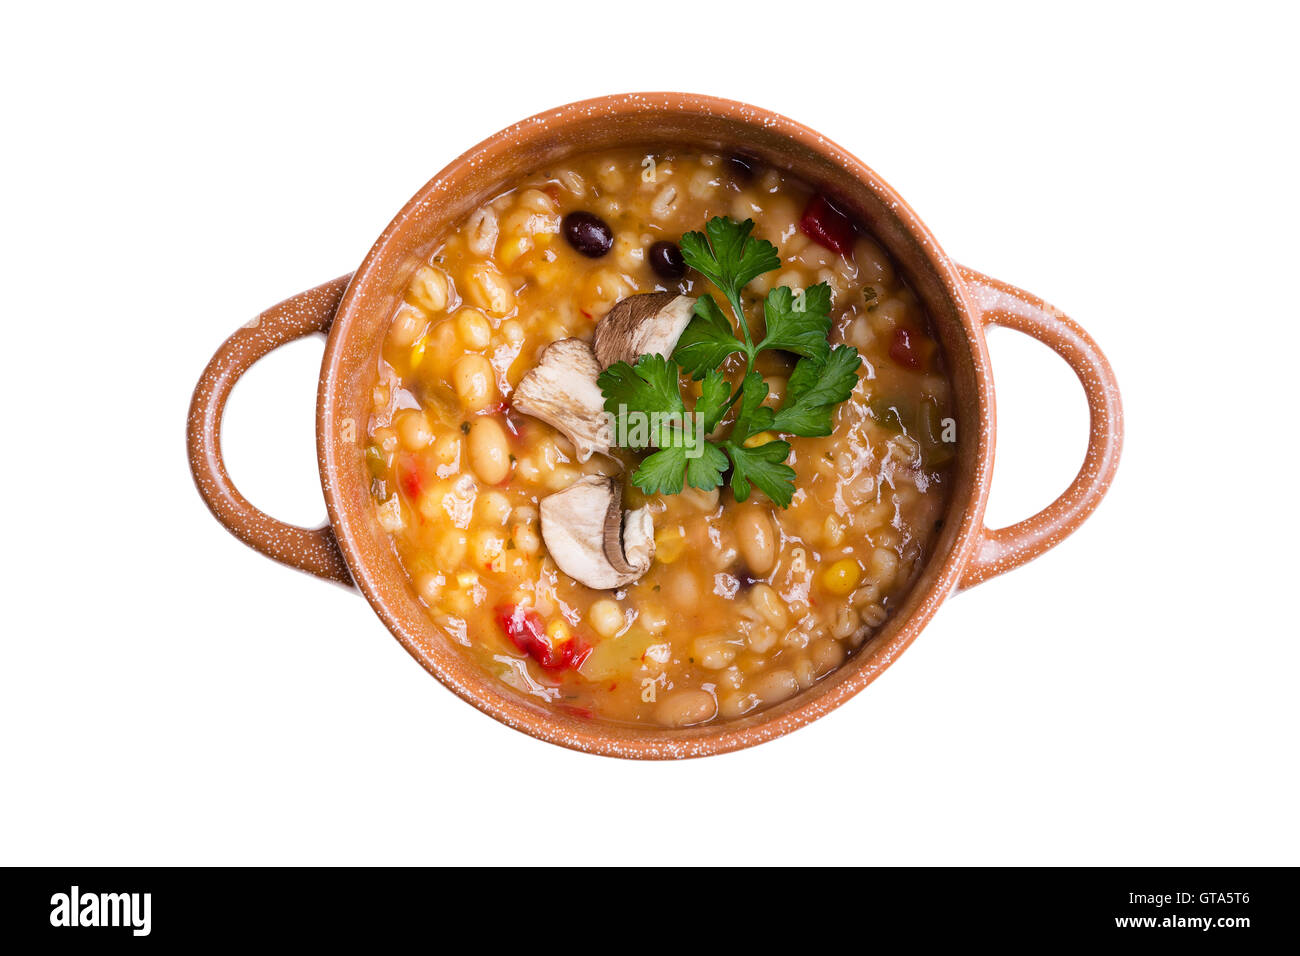 Overhead view of hearty bean and vegetable soup cooked in a clay pot against a white background Stock Photo